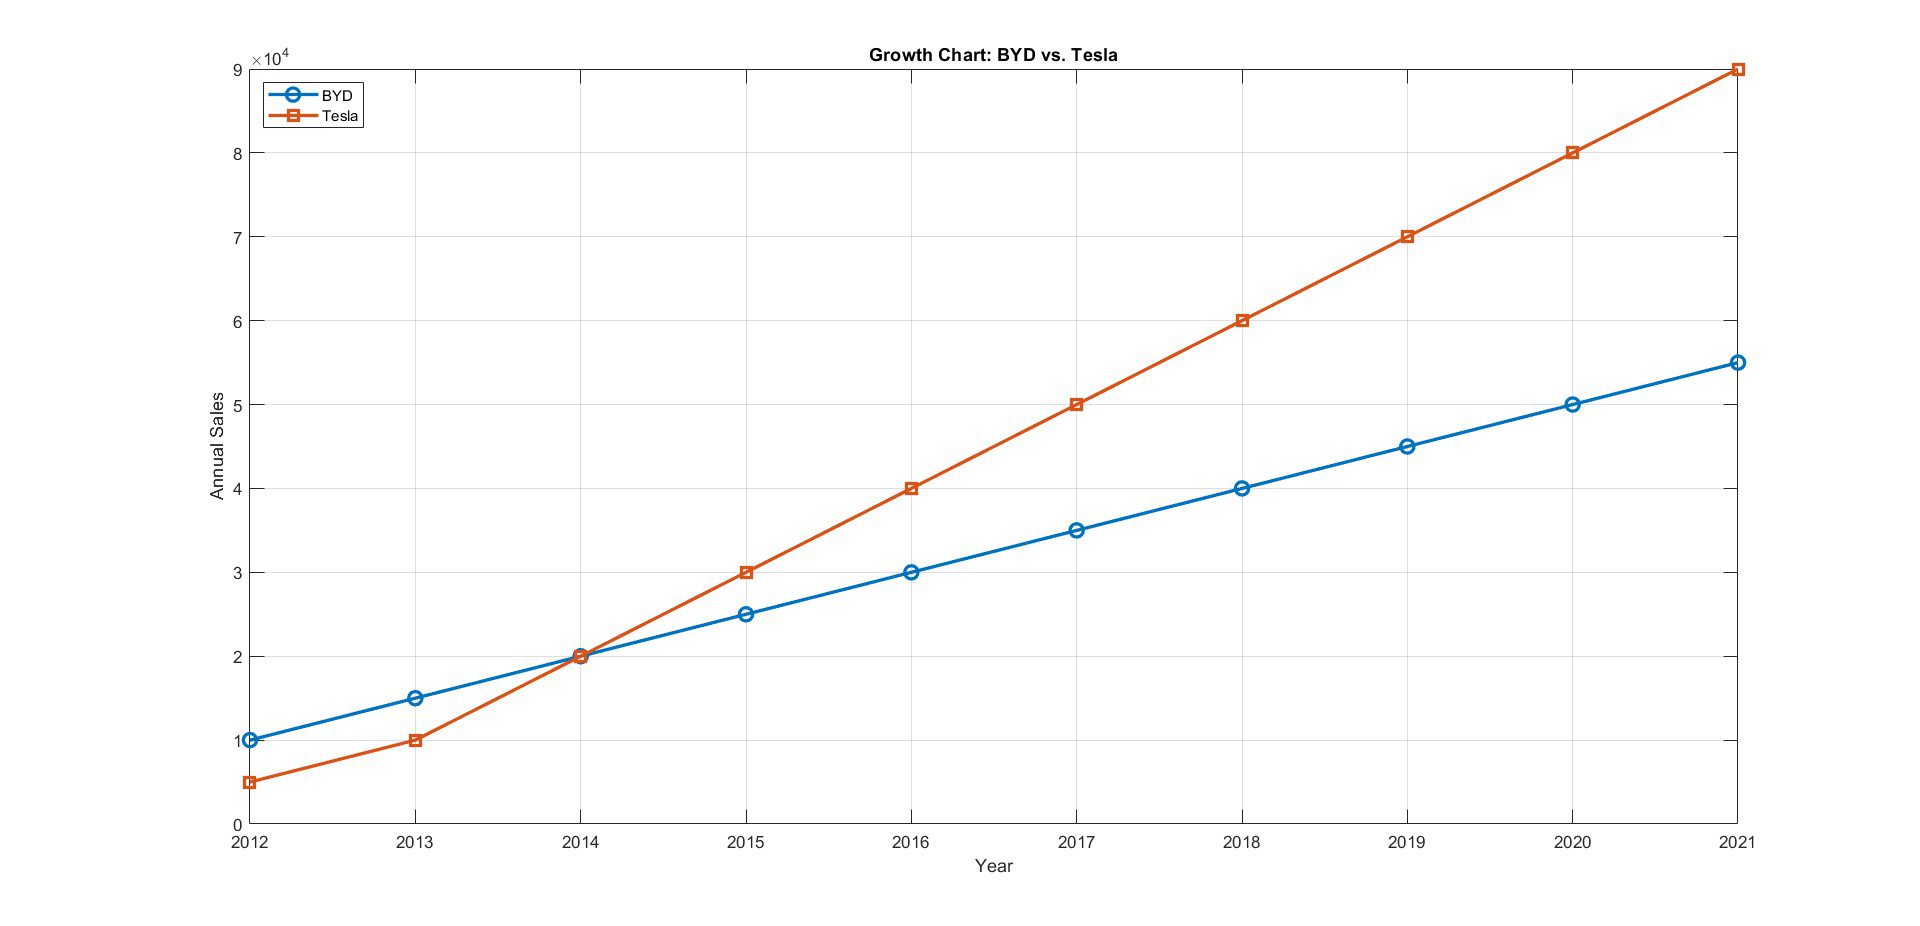 BYD Vs Tesla (Growth over the past years)